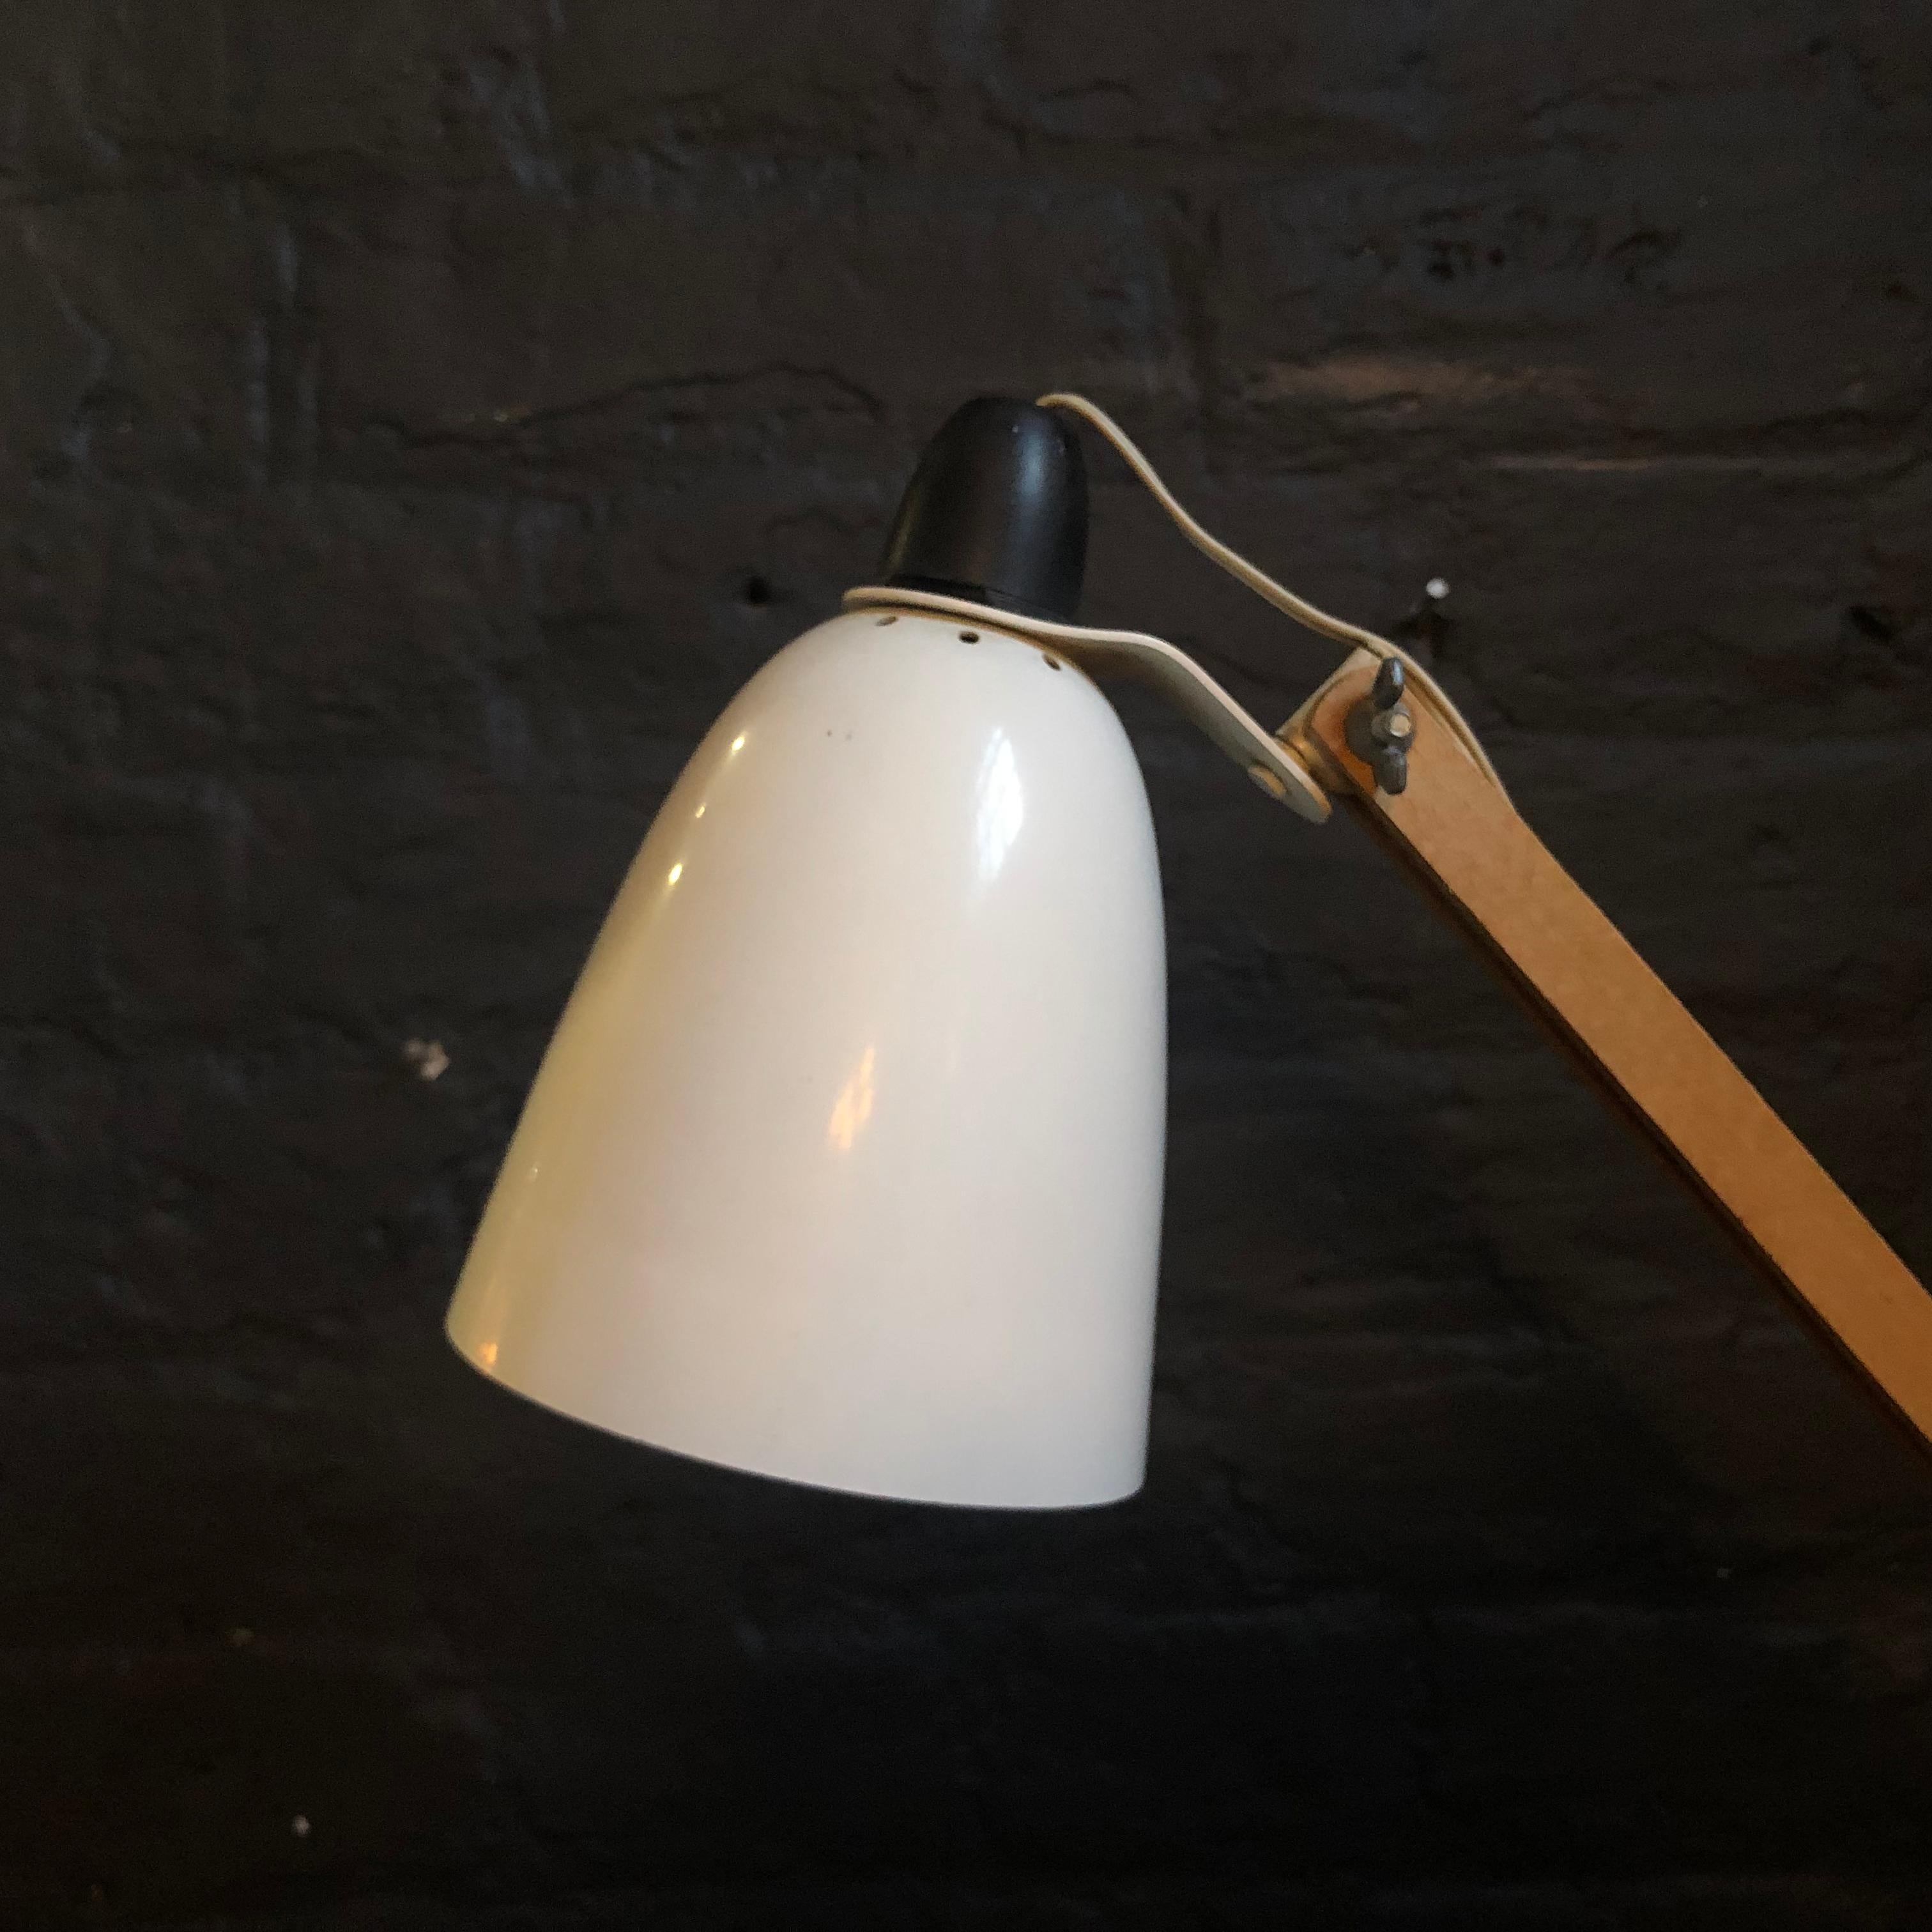 20th Century Vintage Midcentury Maclamp by Terence Conran Desk Lamp in White